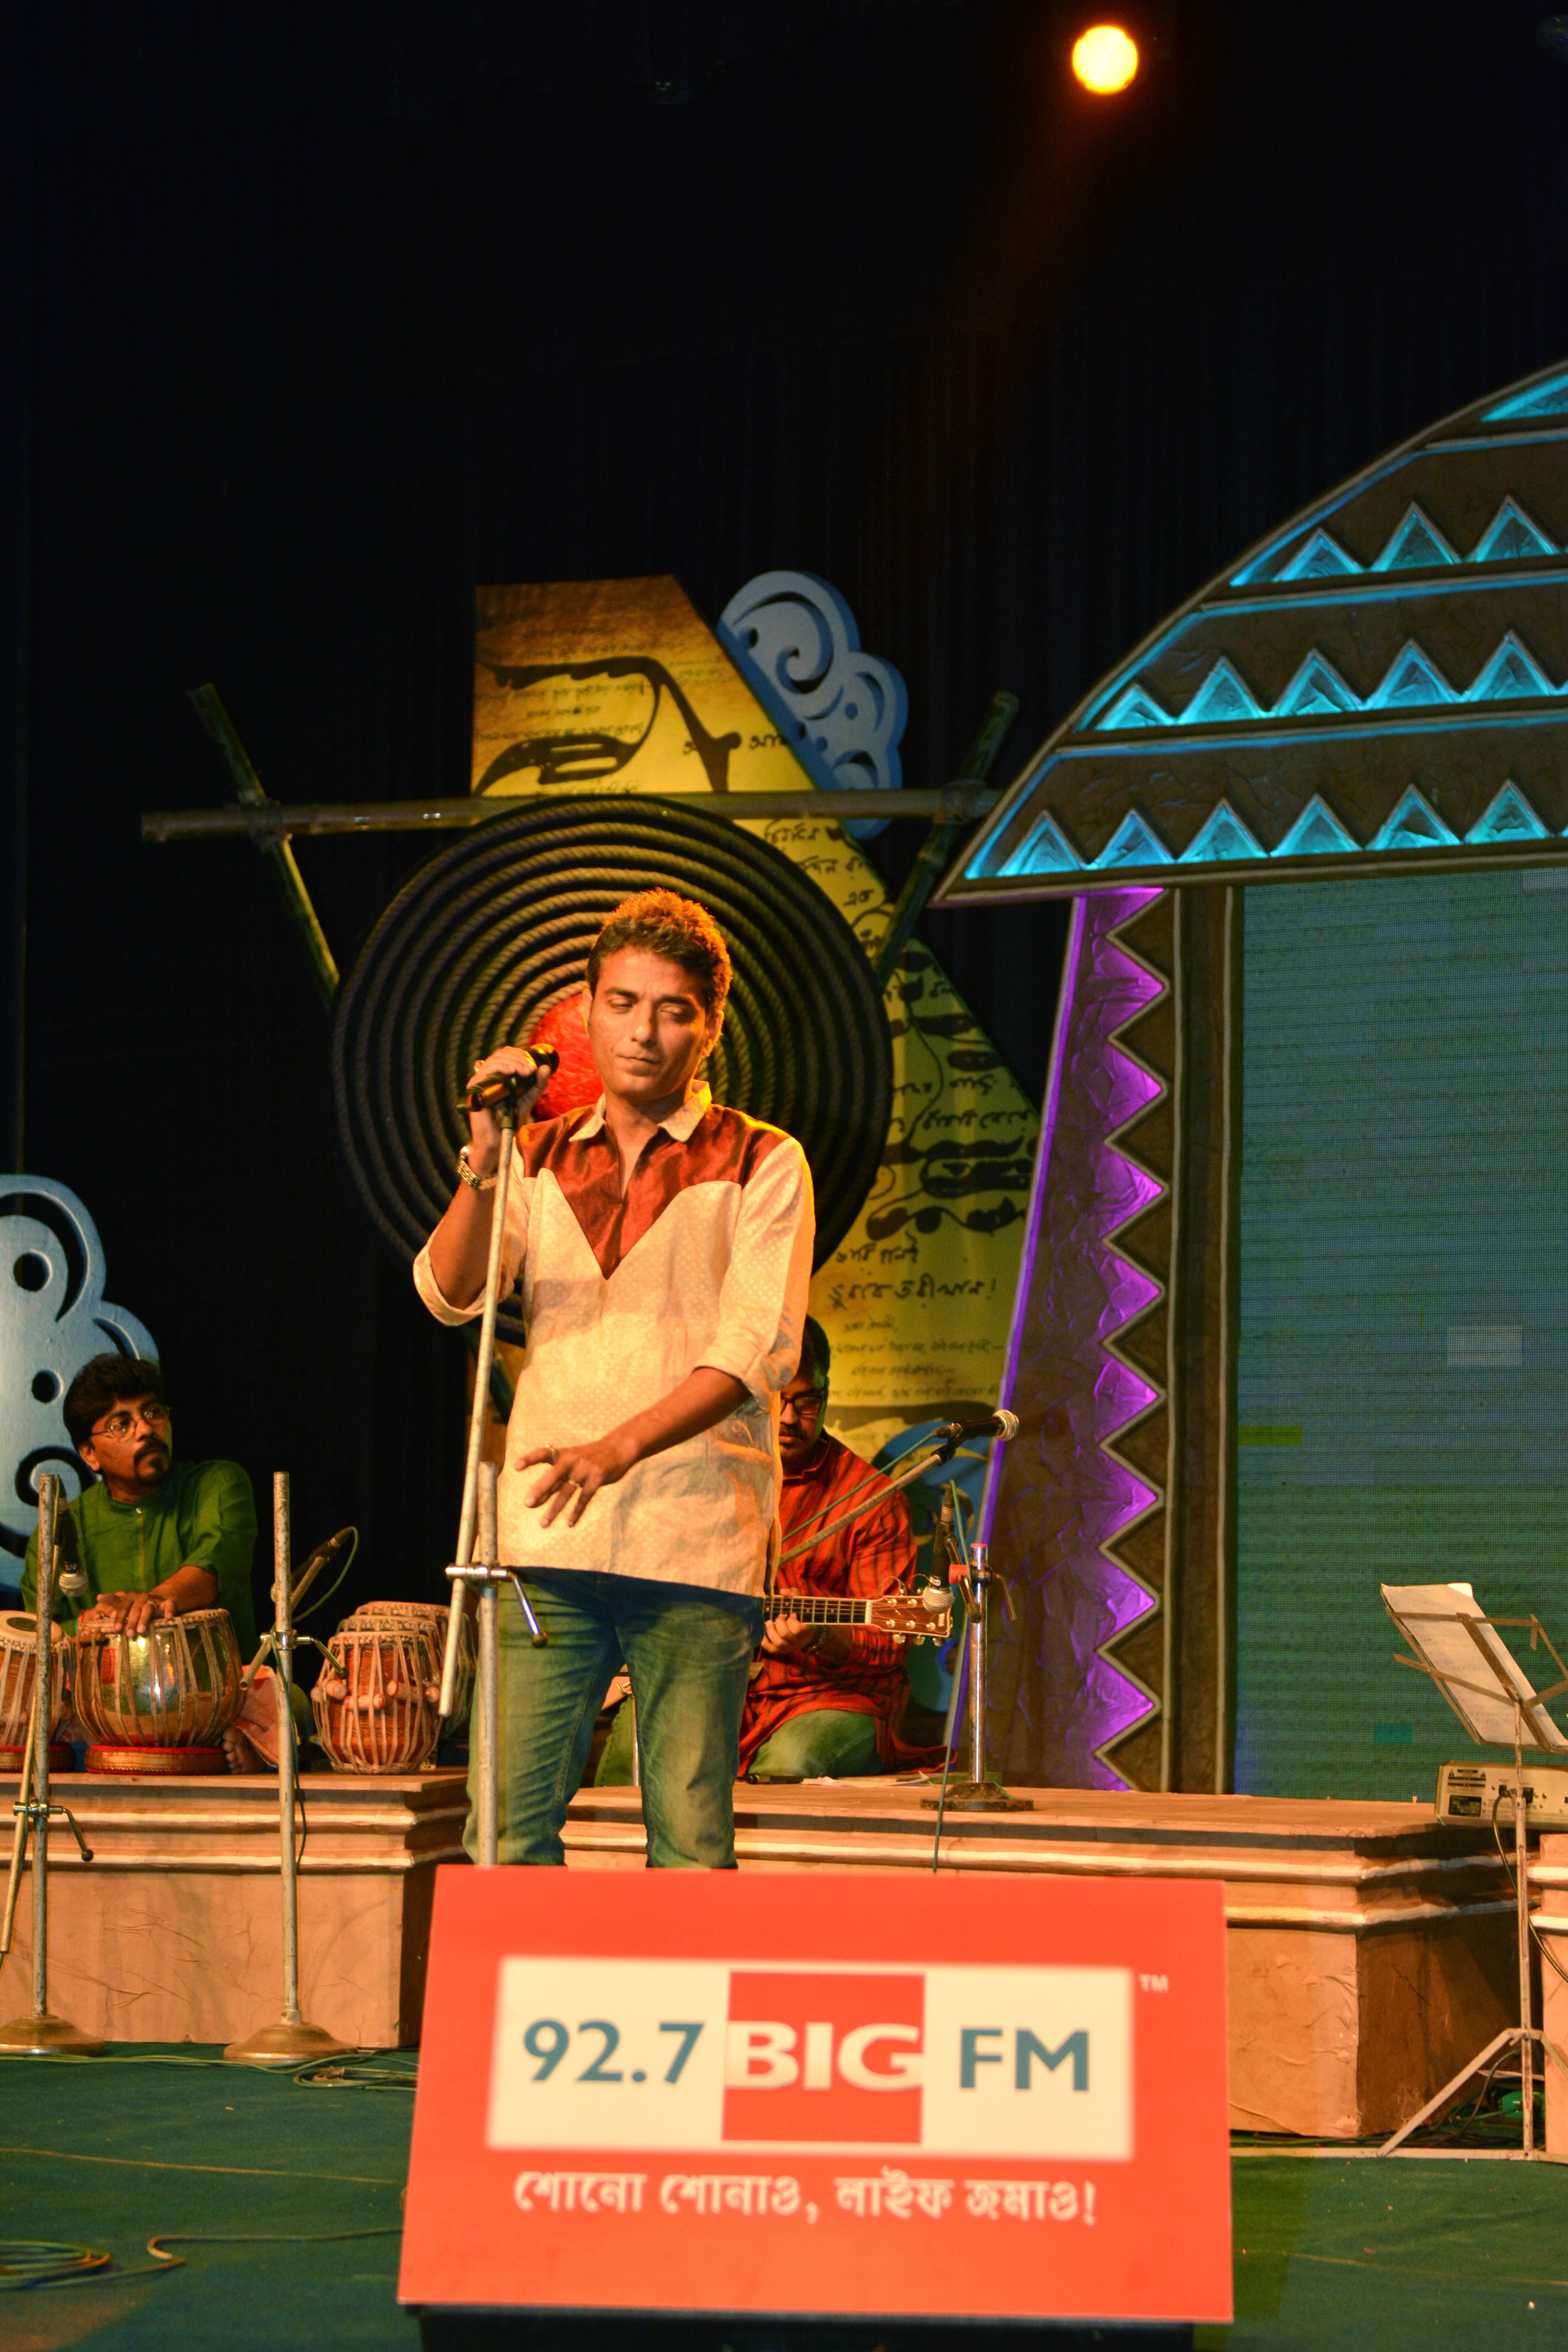 Anindo Bose performing at the event